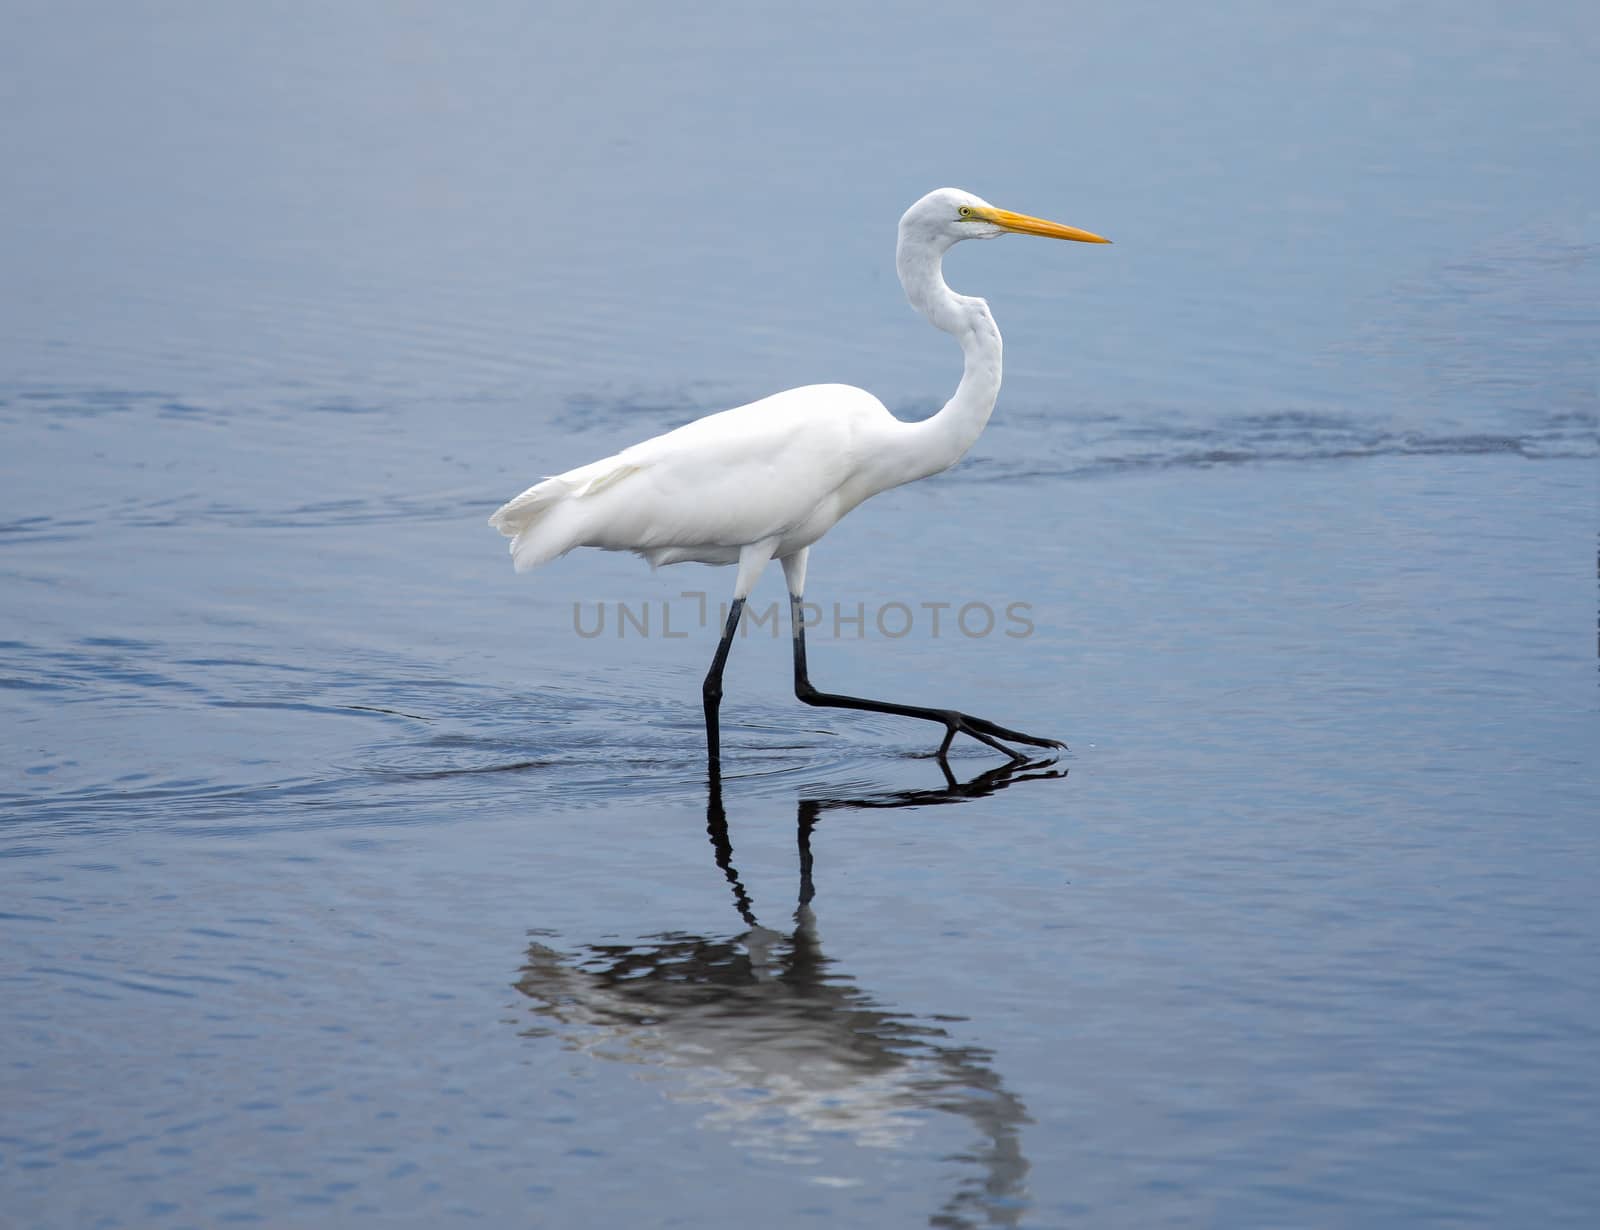 This Great Egret is striding purposely across the wetlands.